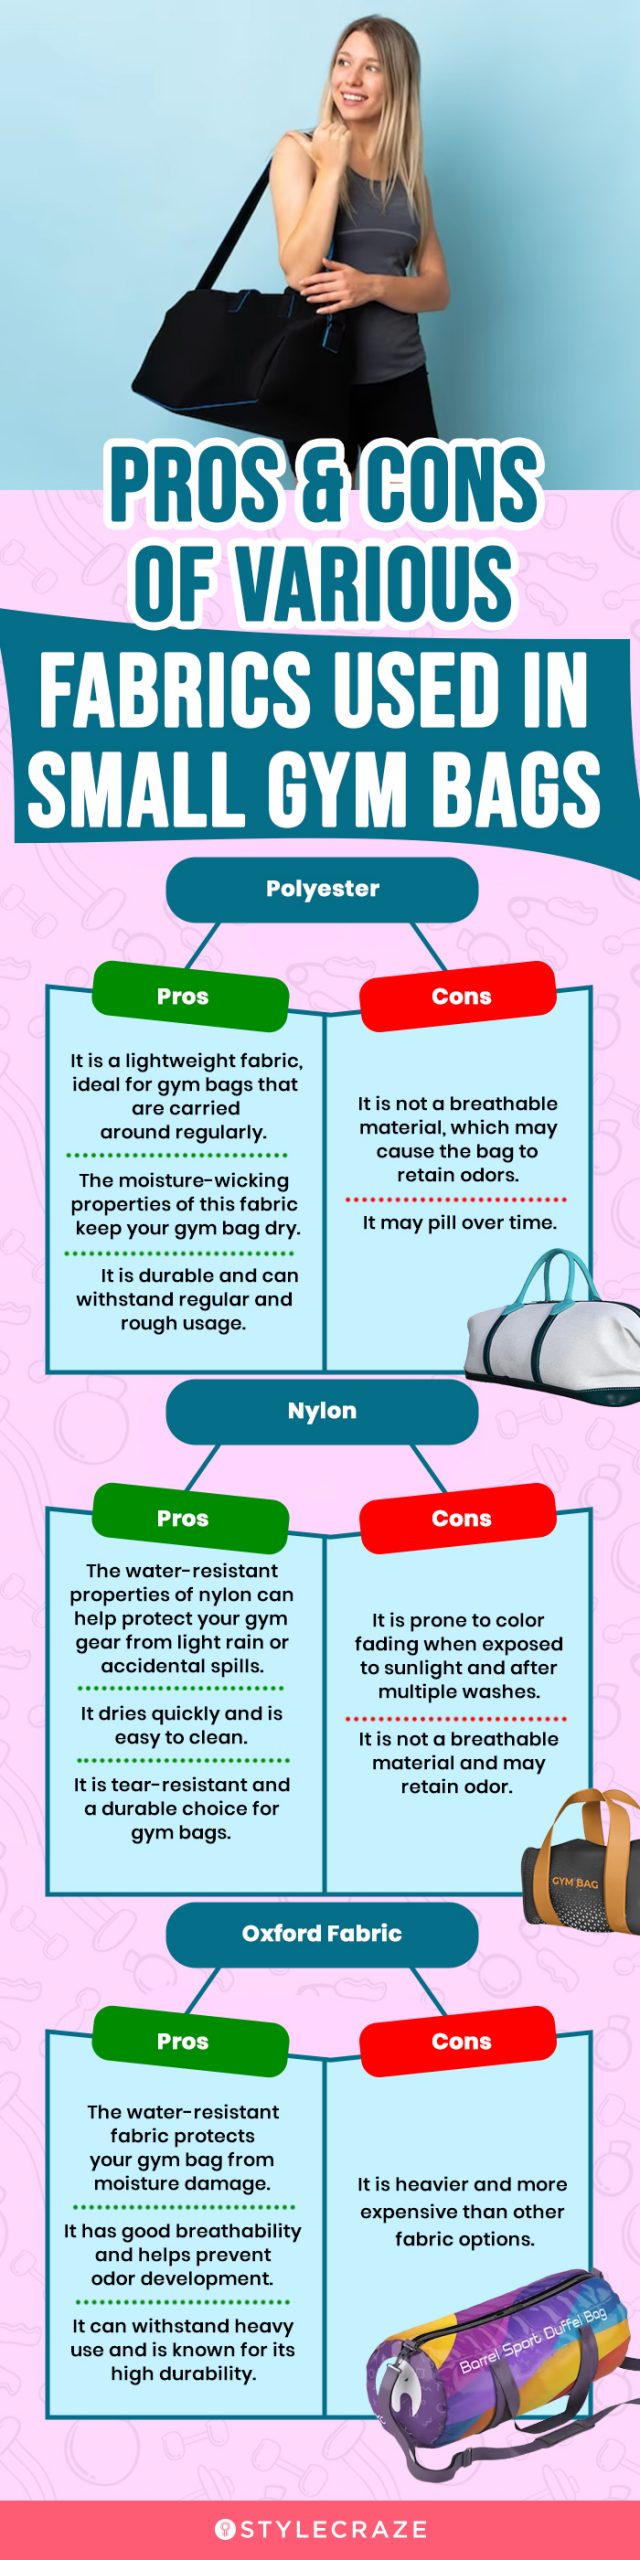 Pros & Cons Of Various Fabrics Used In Small Gym Bags (infographic)